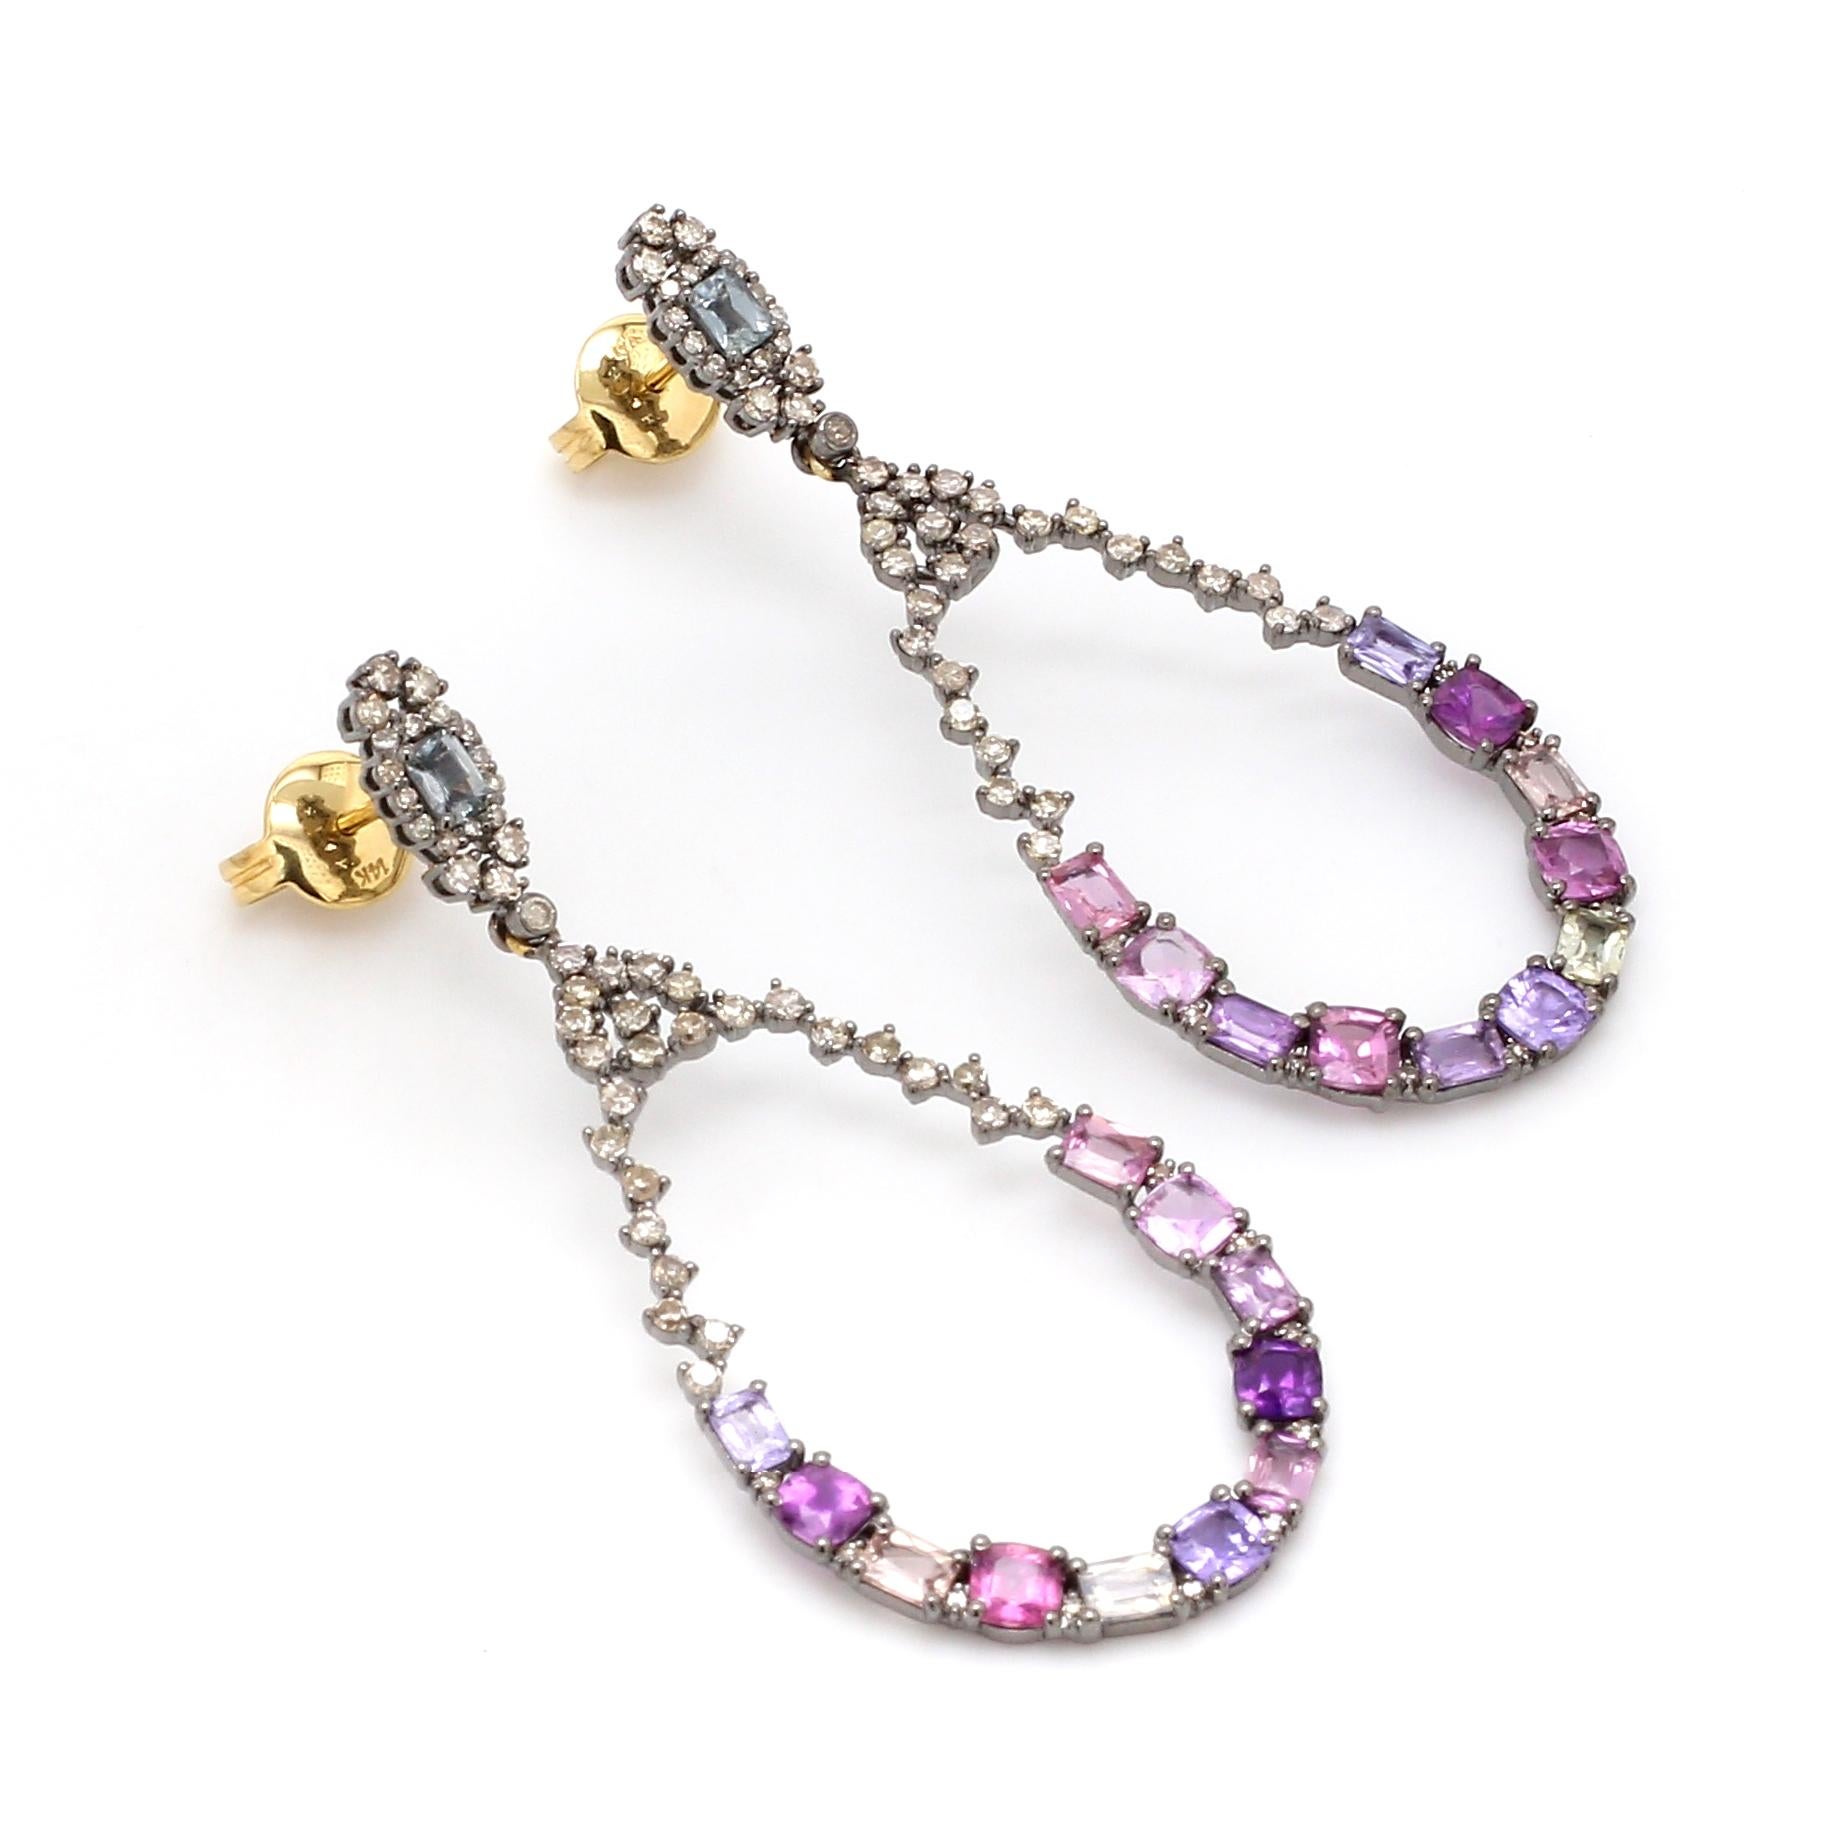 Art-Deco Style Multi-Sapphire and Diamond Pear-Shape Drop Earrings 

This Victorian-era fascinating art-deco style multi-sapphire and diamond hanging earring is impressive. The earring is designed stylishly in the open teardrop look with the